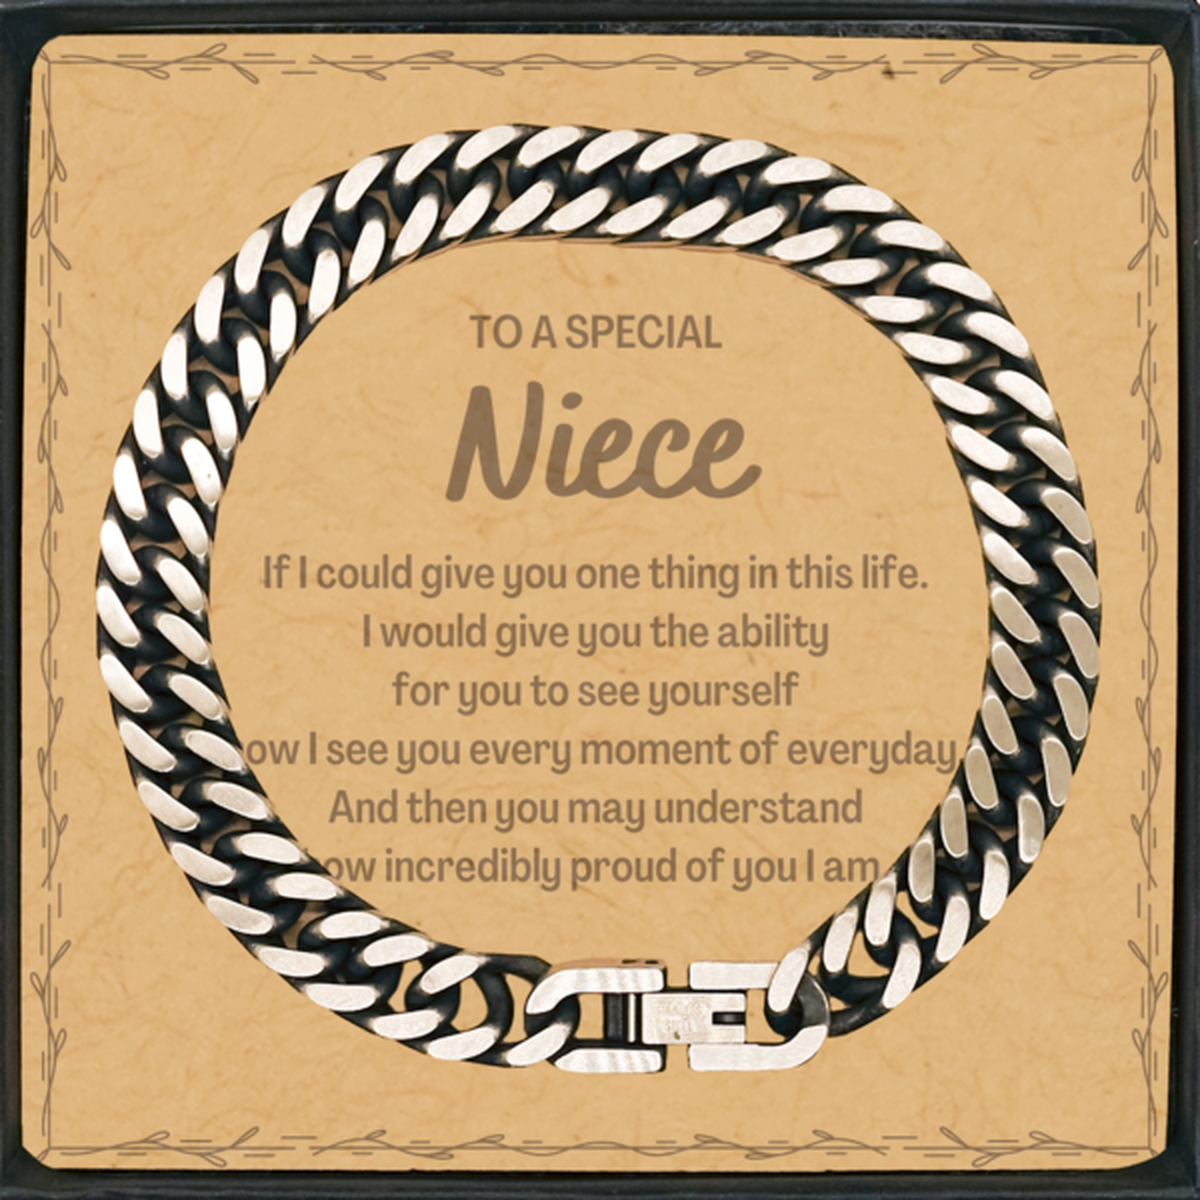 To My Niece Cuban Link Chain Bracelet, Gifts For Niece Message Card, Inspirational Gifts for Christmas Birthday, Epic Gifts for Niece To A Special Niece how incredibly proud of you I am